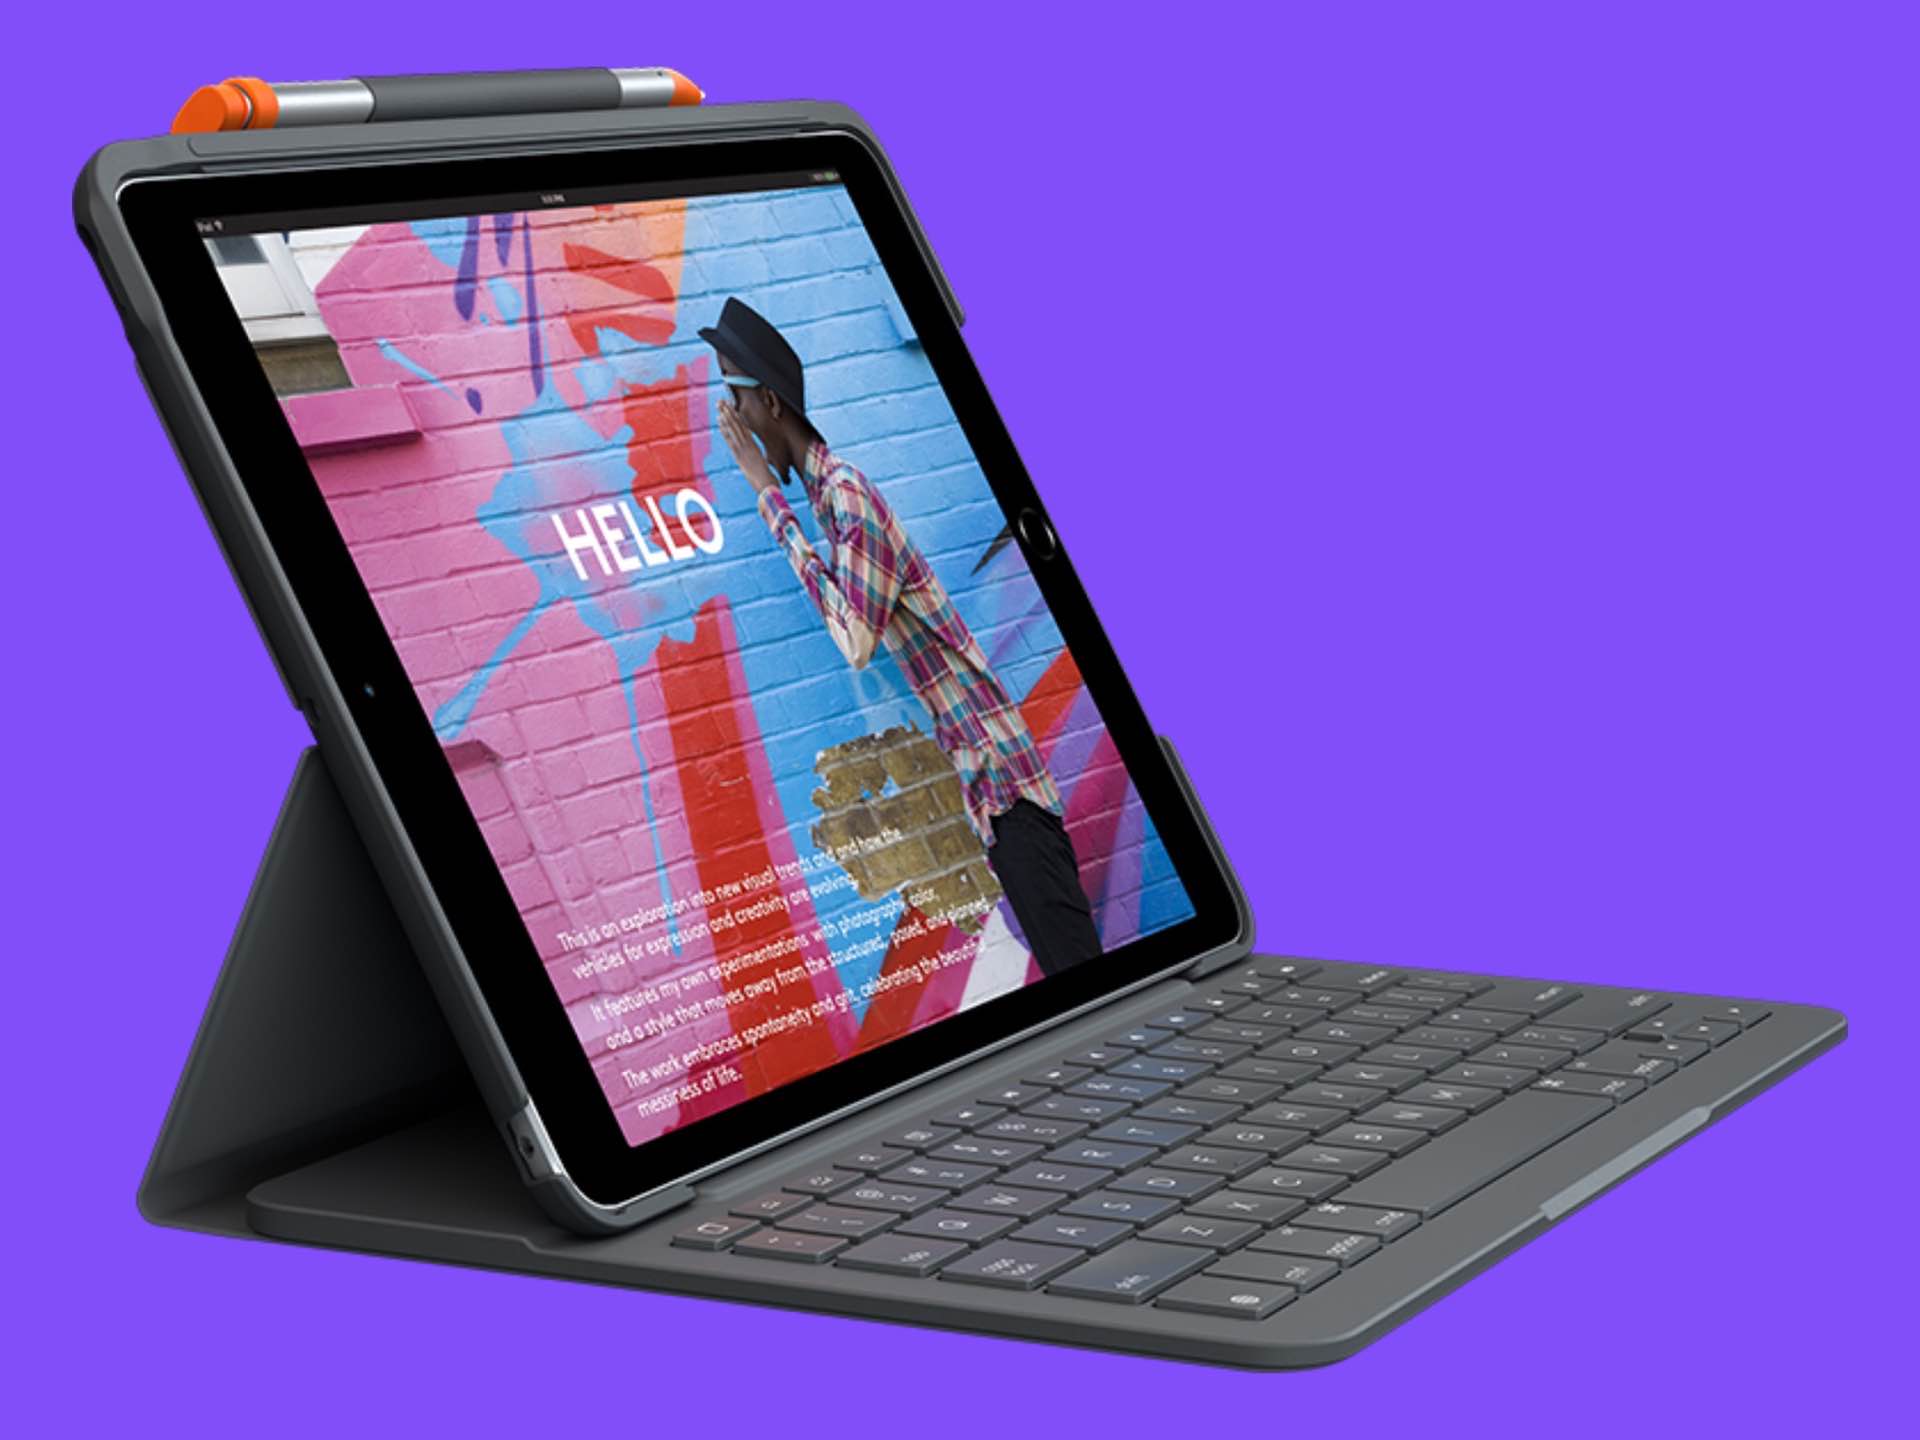 Kano Elendighed Bære Logitech's “Slim Folio” is Still the Best Keyboard Case for iPad in 2020 —  Tools and Toys